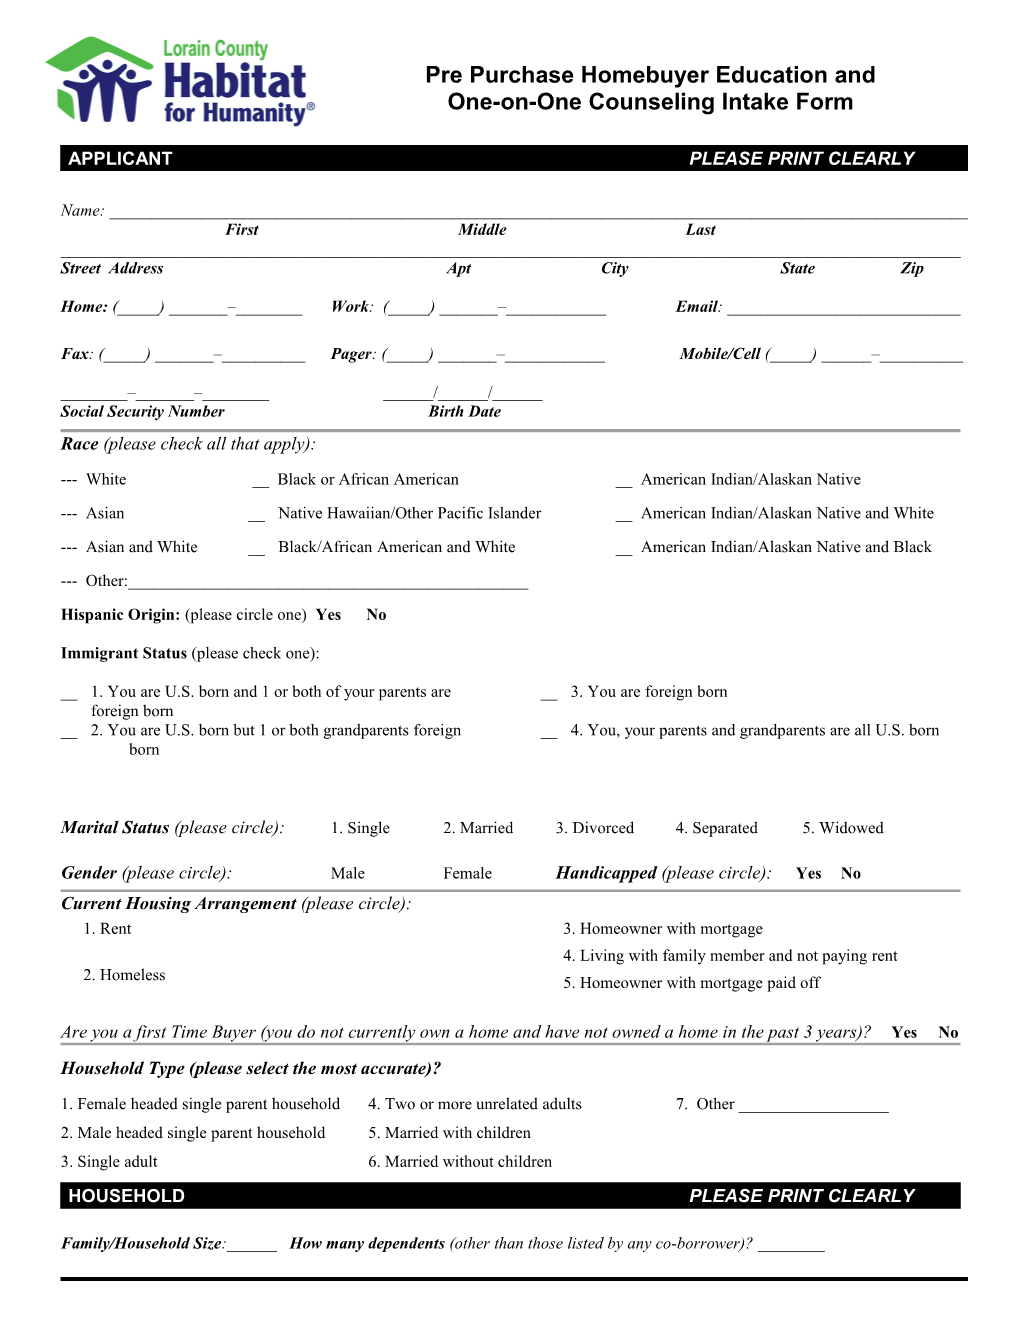 Sample Customer Intake Form (From Nstep)